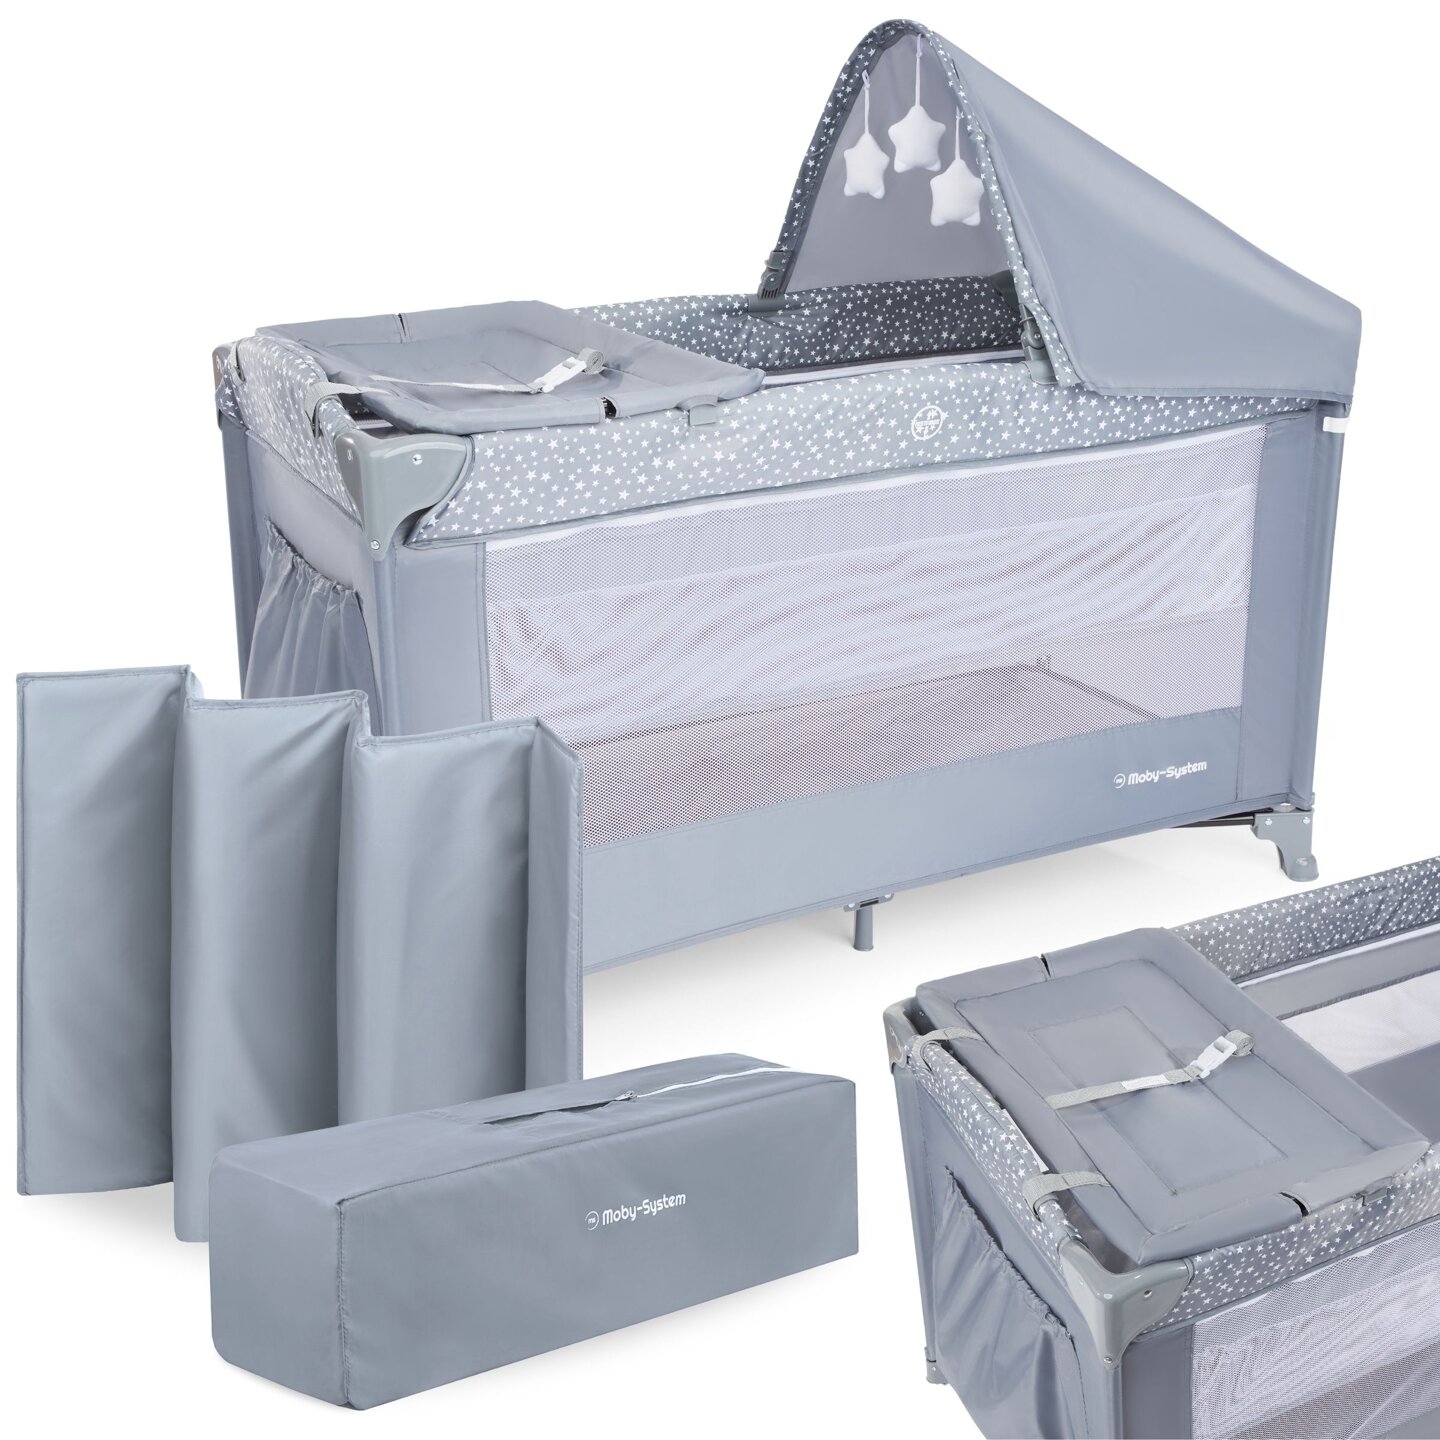 Travel cot / playpen 2 levels with changing table, roof and Happy Traveler BASIC PLUS mattress - gray